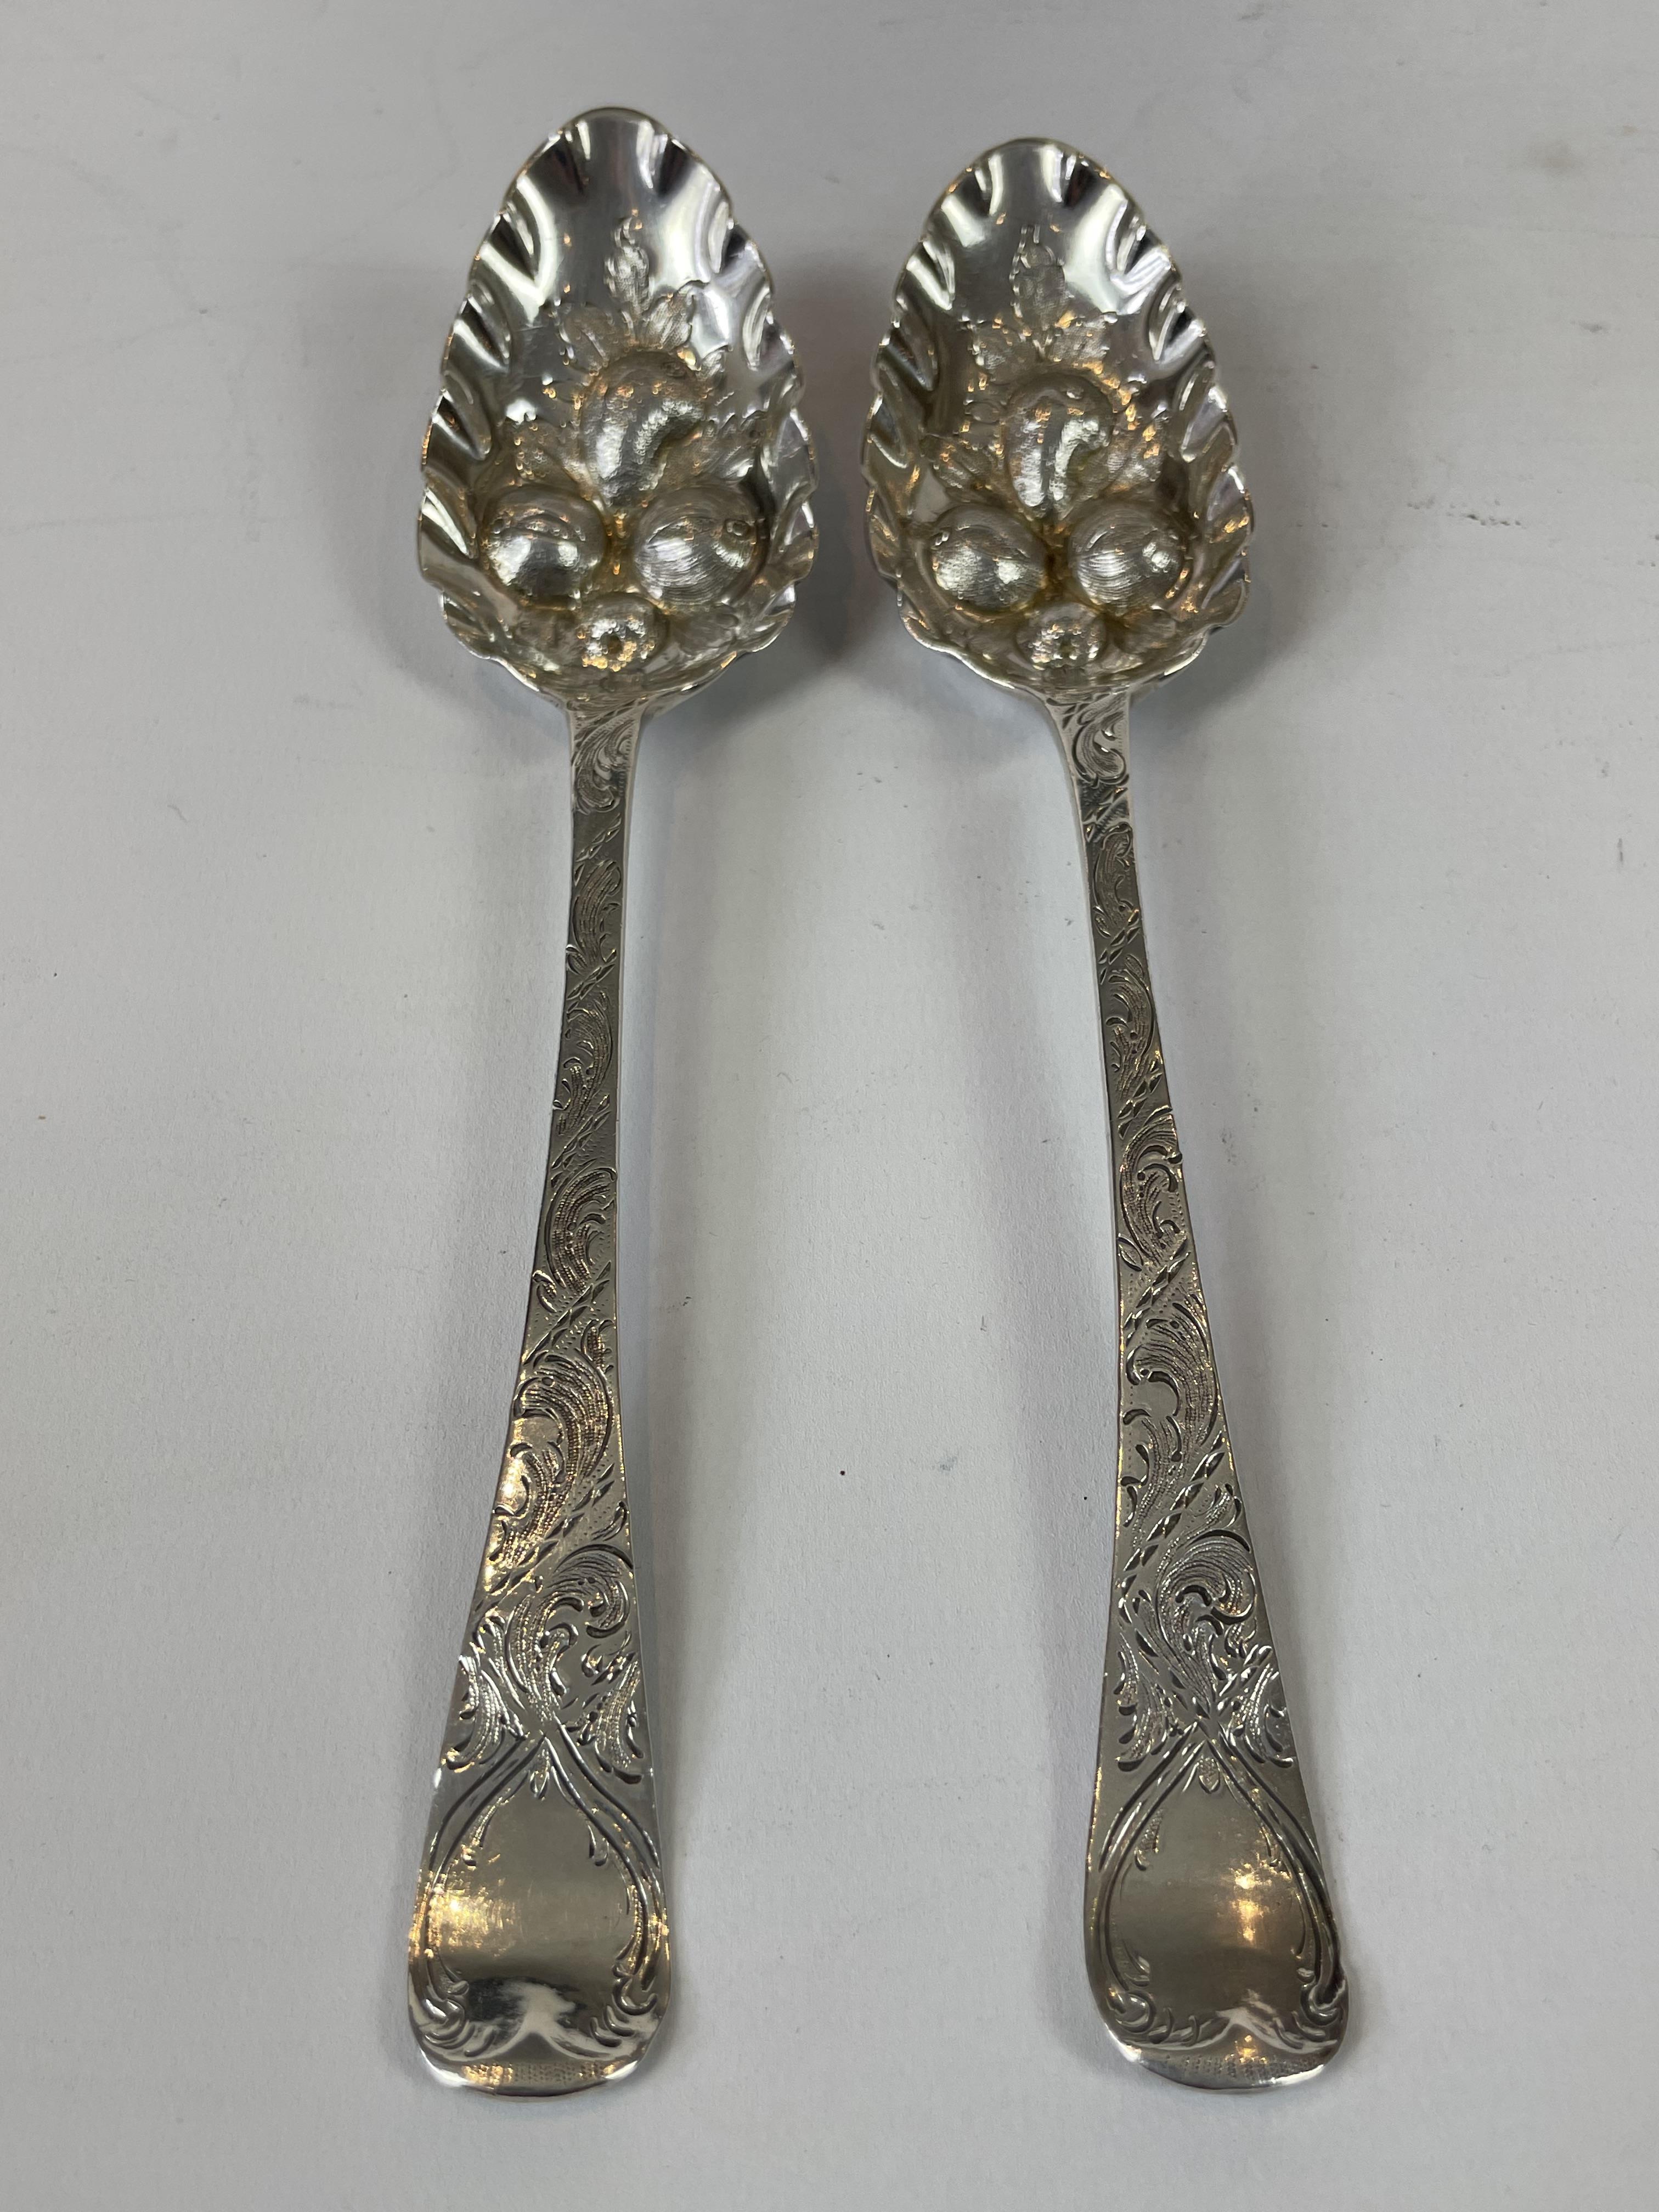 pair of solid silver berry spoons dated 1779 - Image 3 of 3